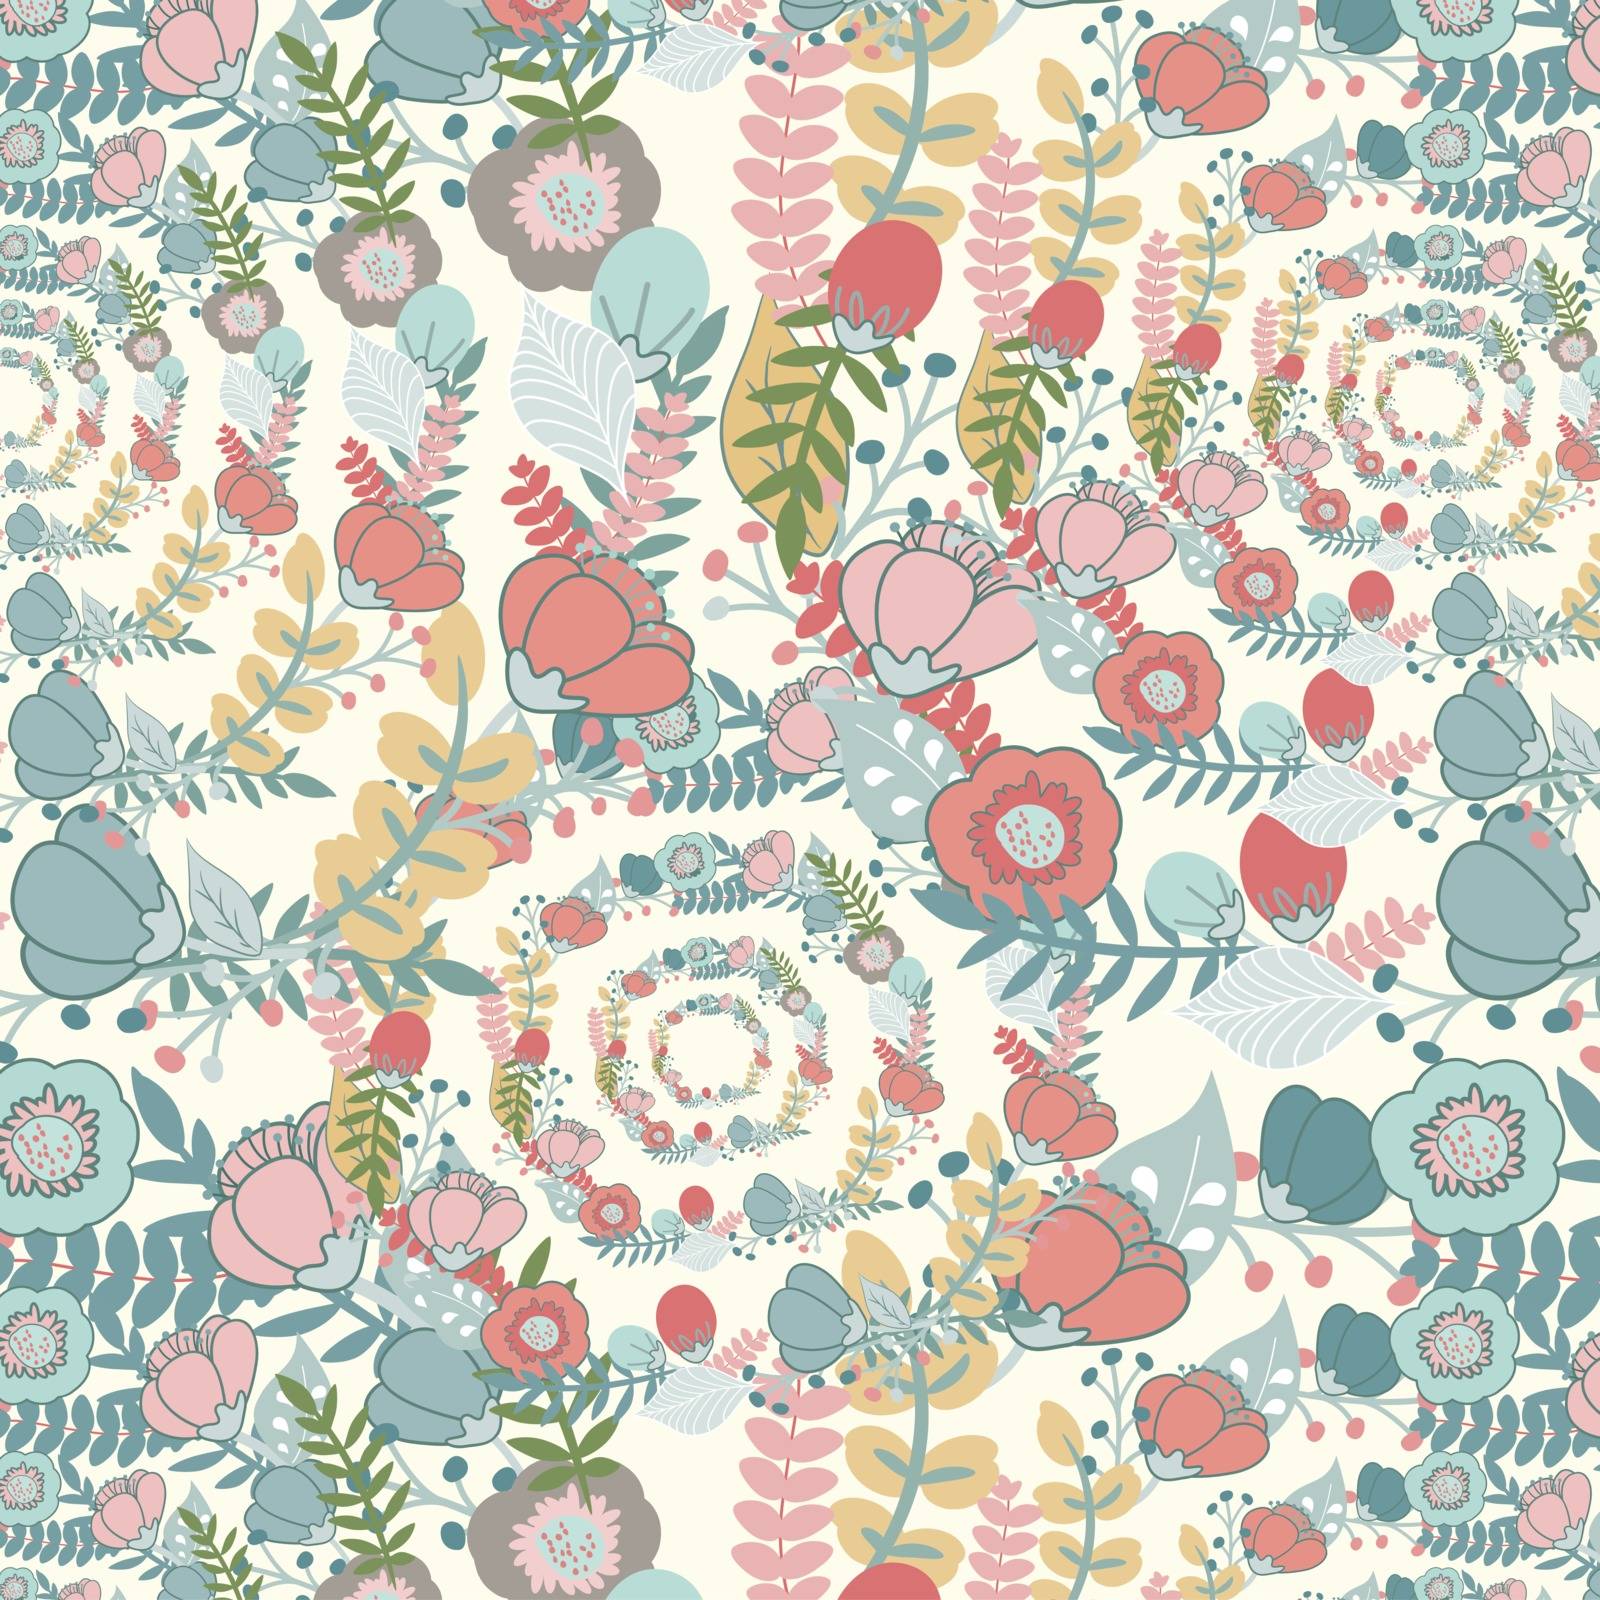 Elegant pattern with flowers by AnaMarques